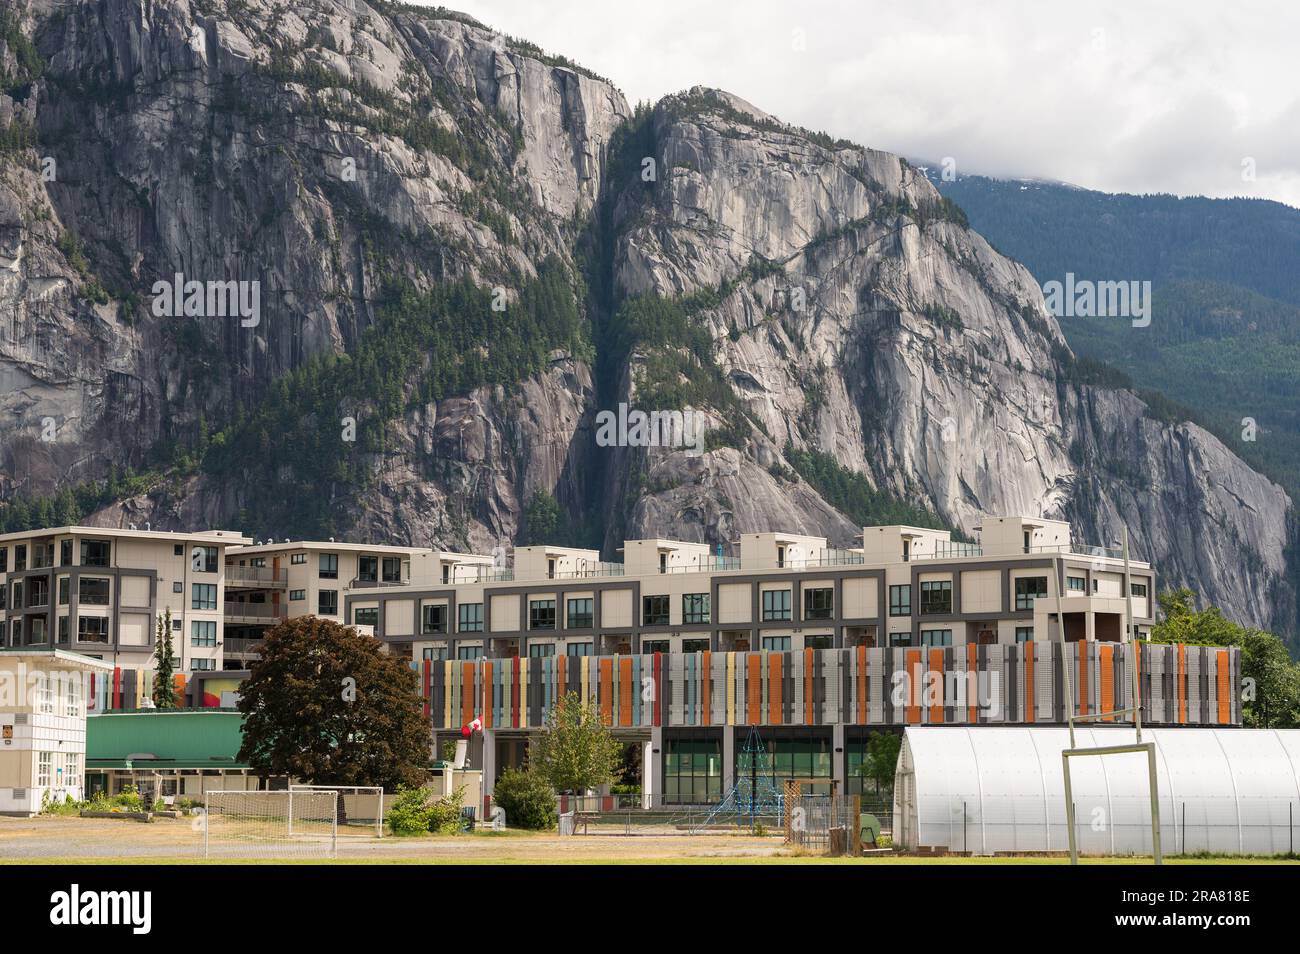 New condominium and housing development with the Stawamus Chief in the background. Squamish BC, Canada. Stock Photo